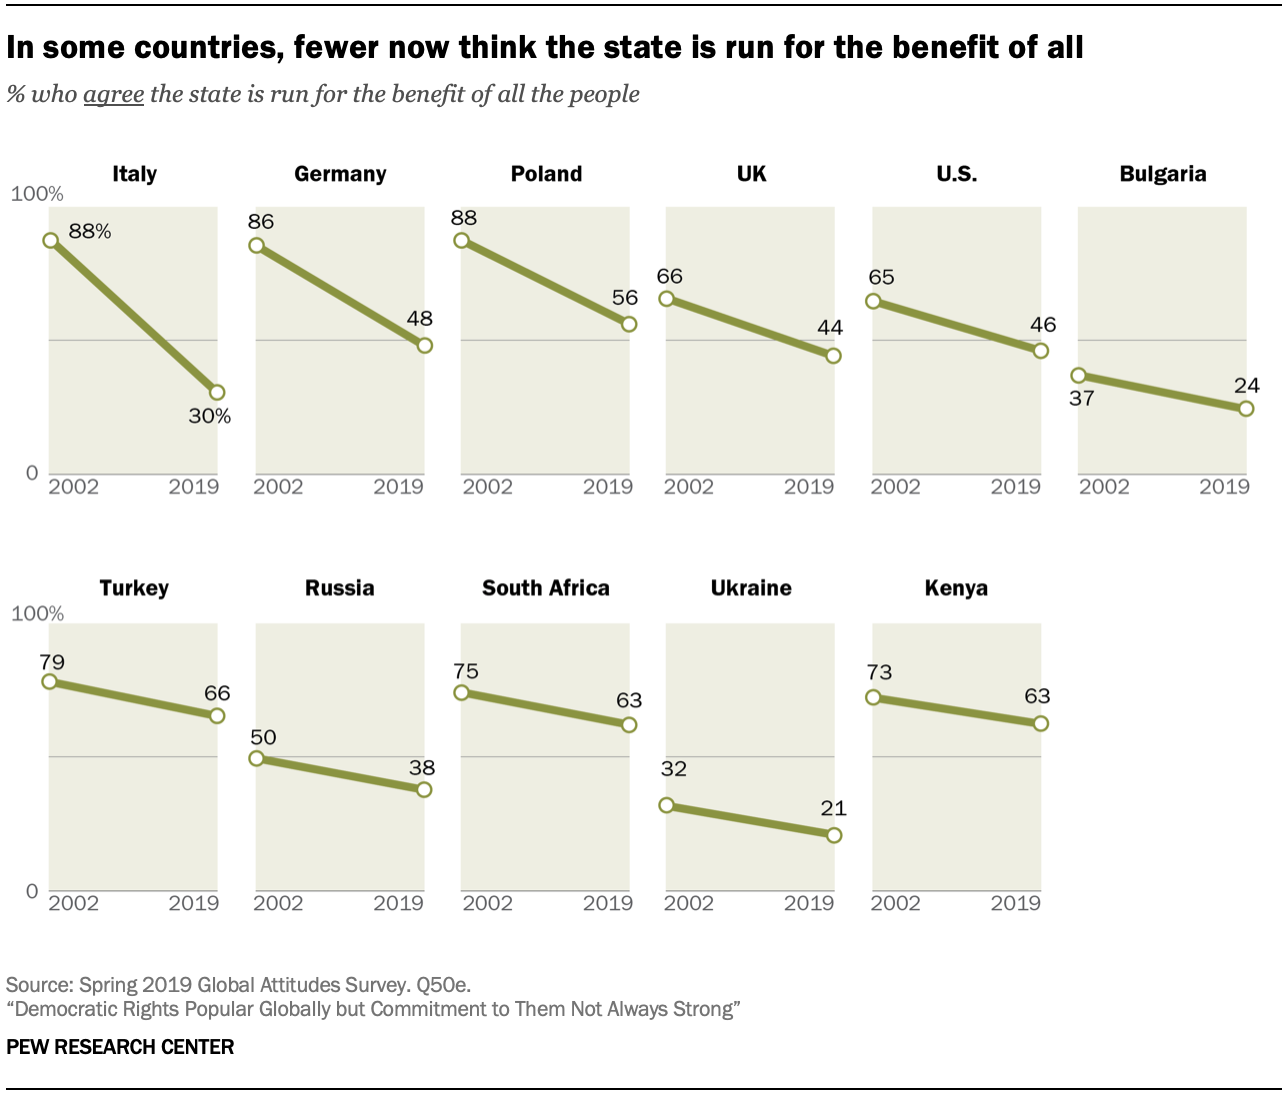 Chart shows in some countries, fewer now think the state is run for the benefit of all